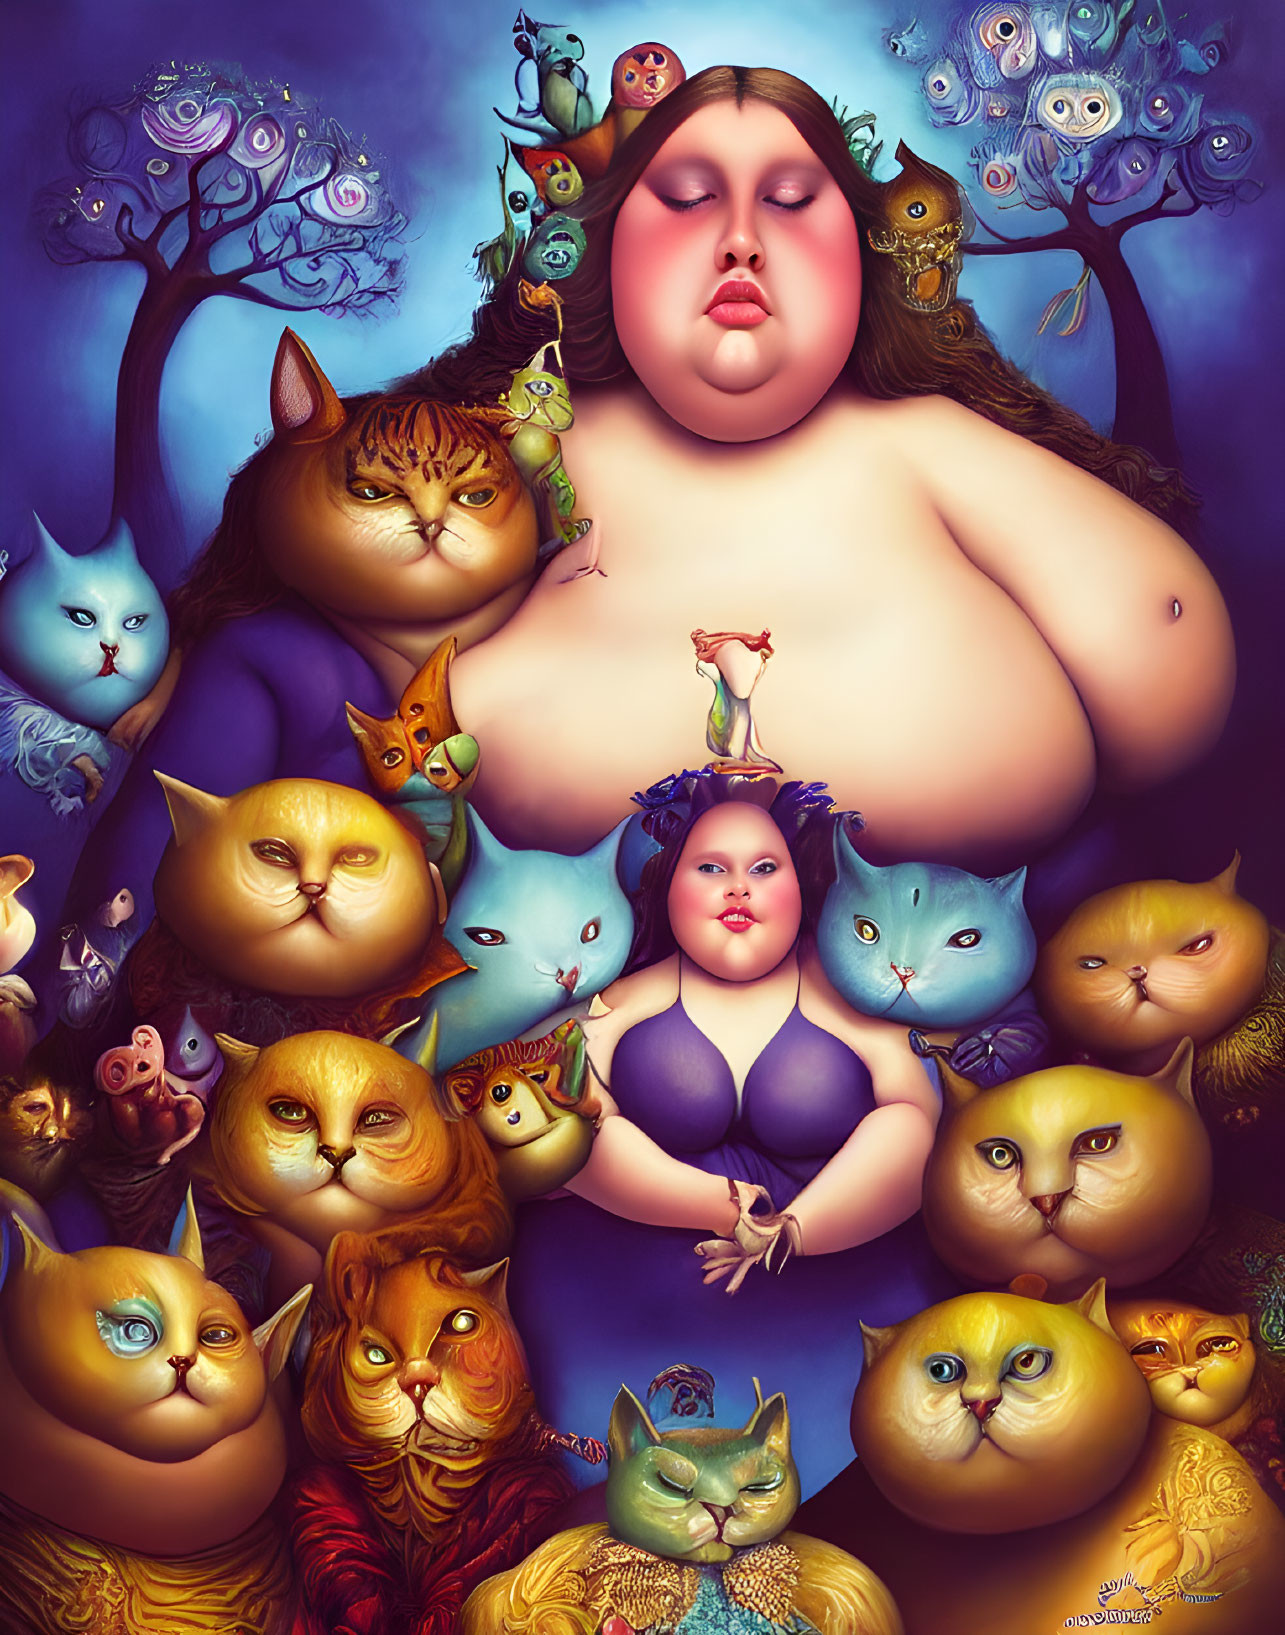 Colorful surreal art: Woman with expressive cats in whimsical setting